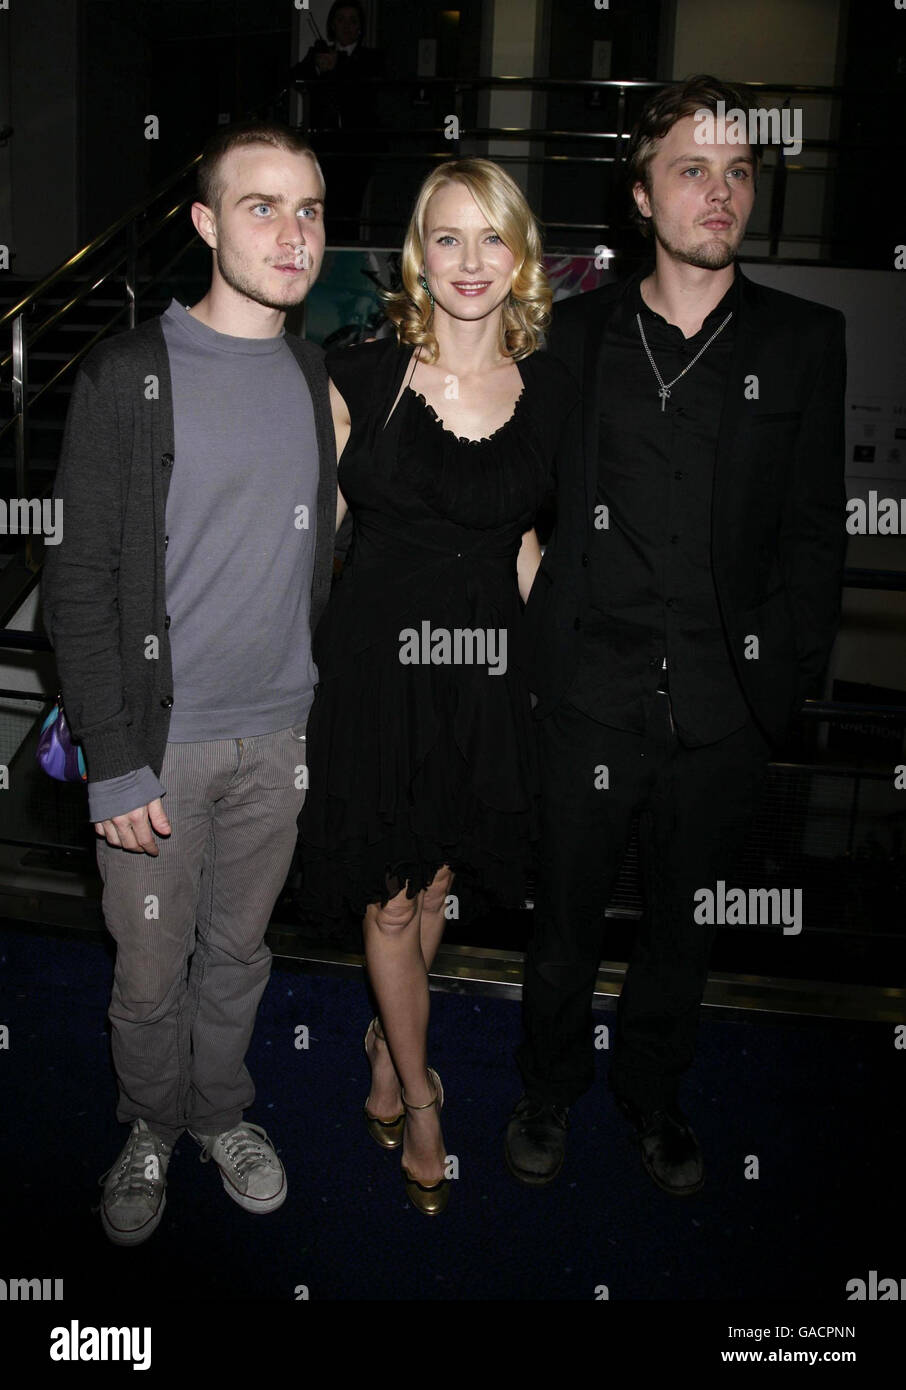 (From left to right) Brady Corbet, Naomi Watts and Michael Pitt arrive for the London Film Festival premiere of Funny Games, at the Odeon West End in Leicester Square, central London. Stock Photo